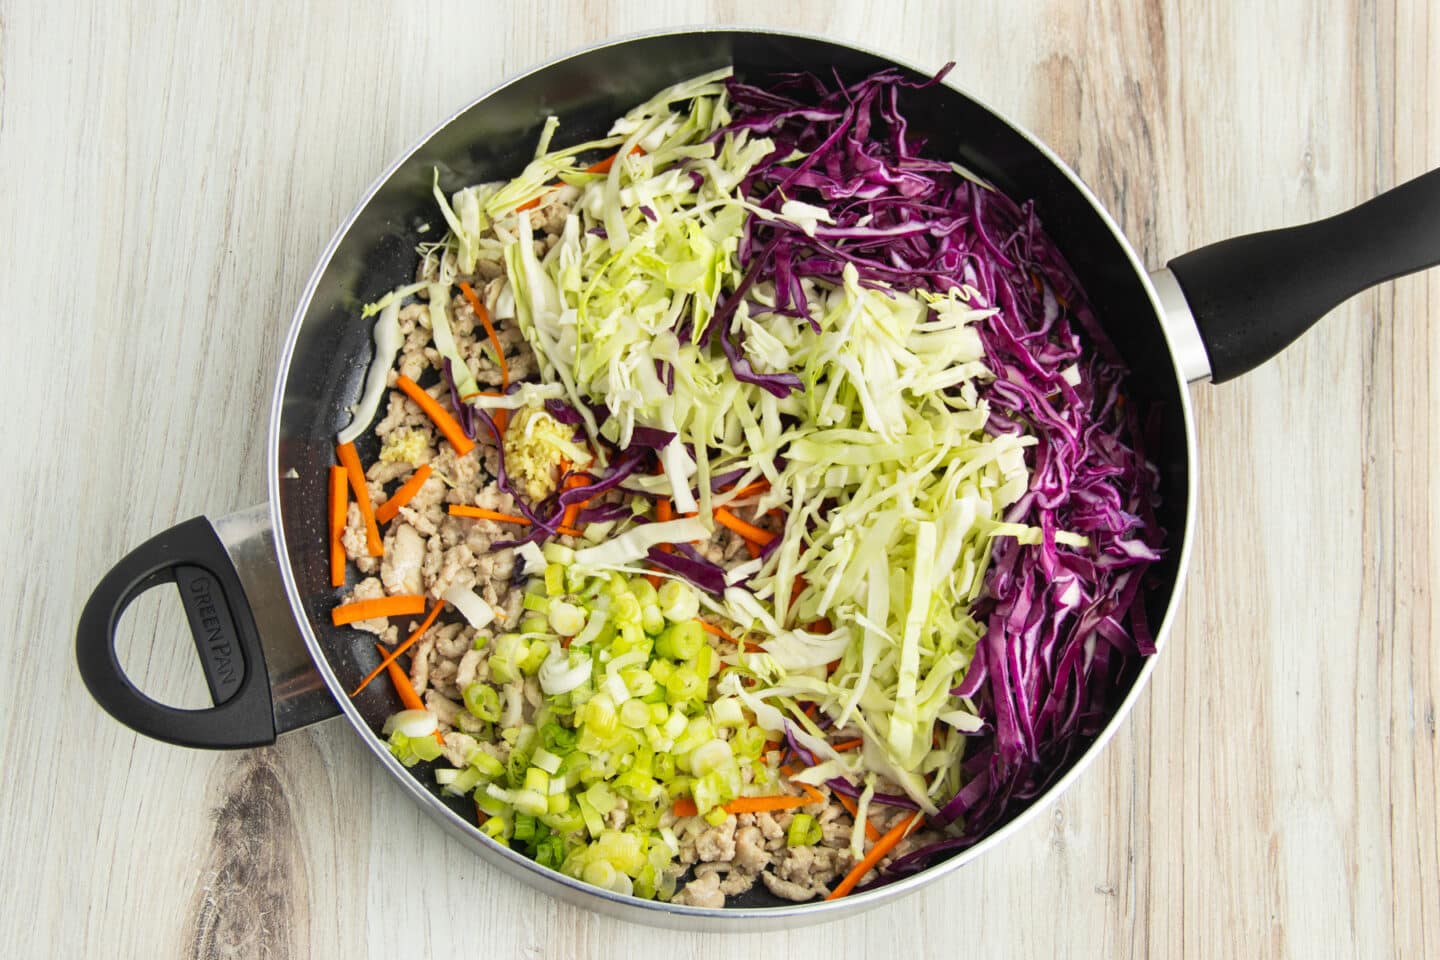 Picture of a skillet with added cabbage, carrots and green onions.